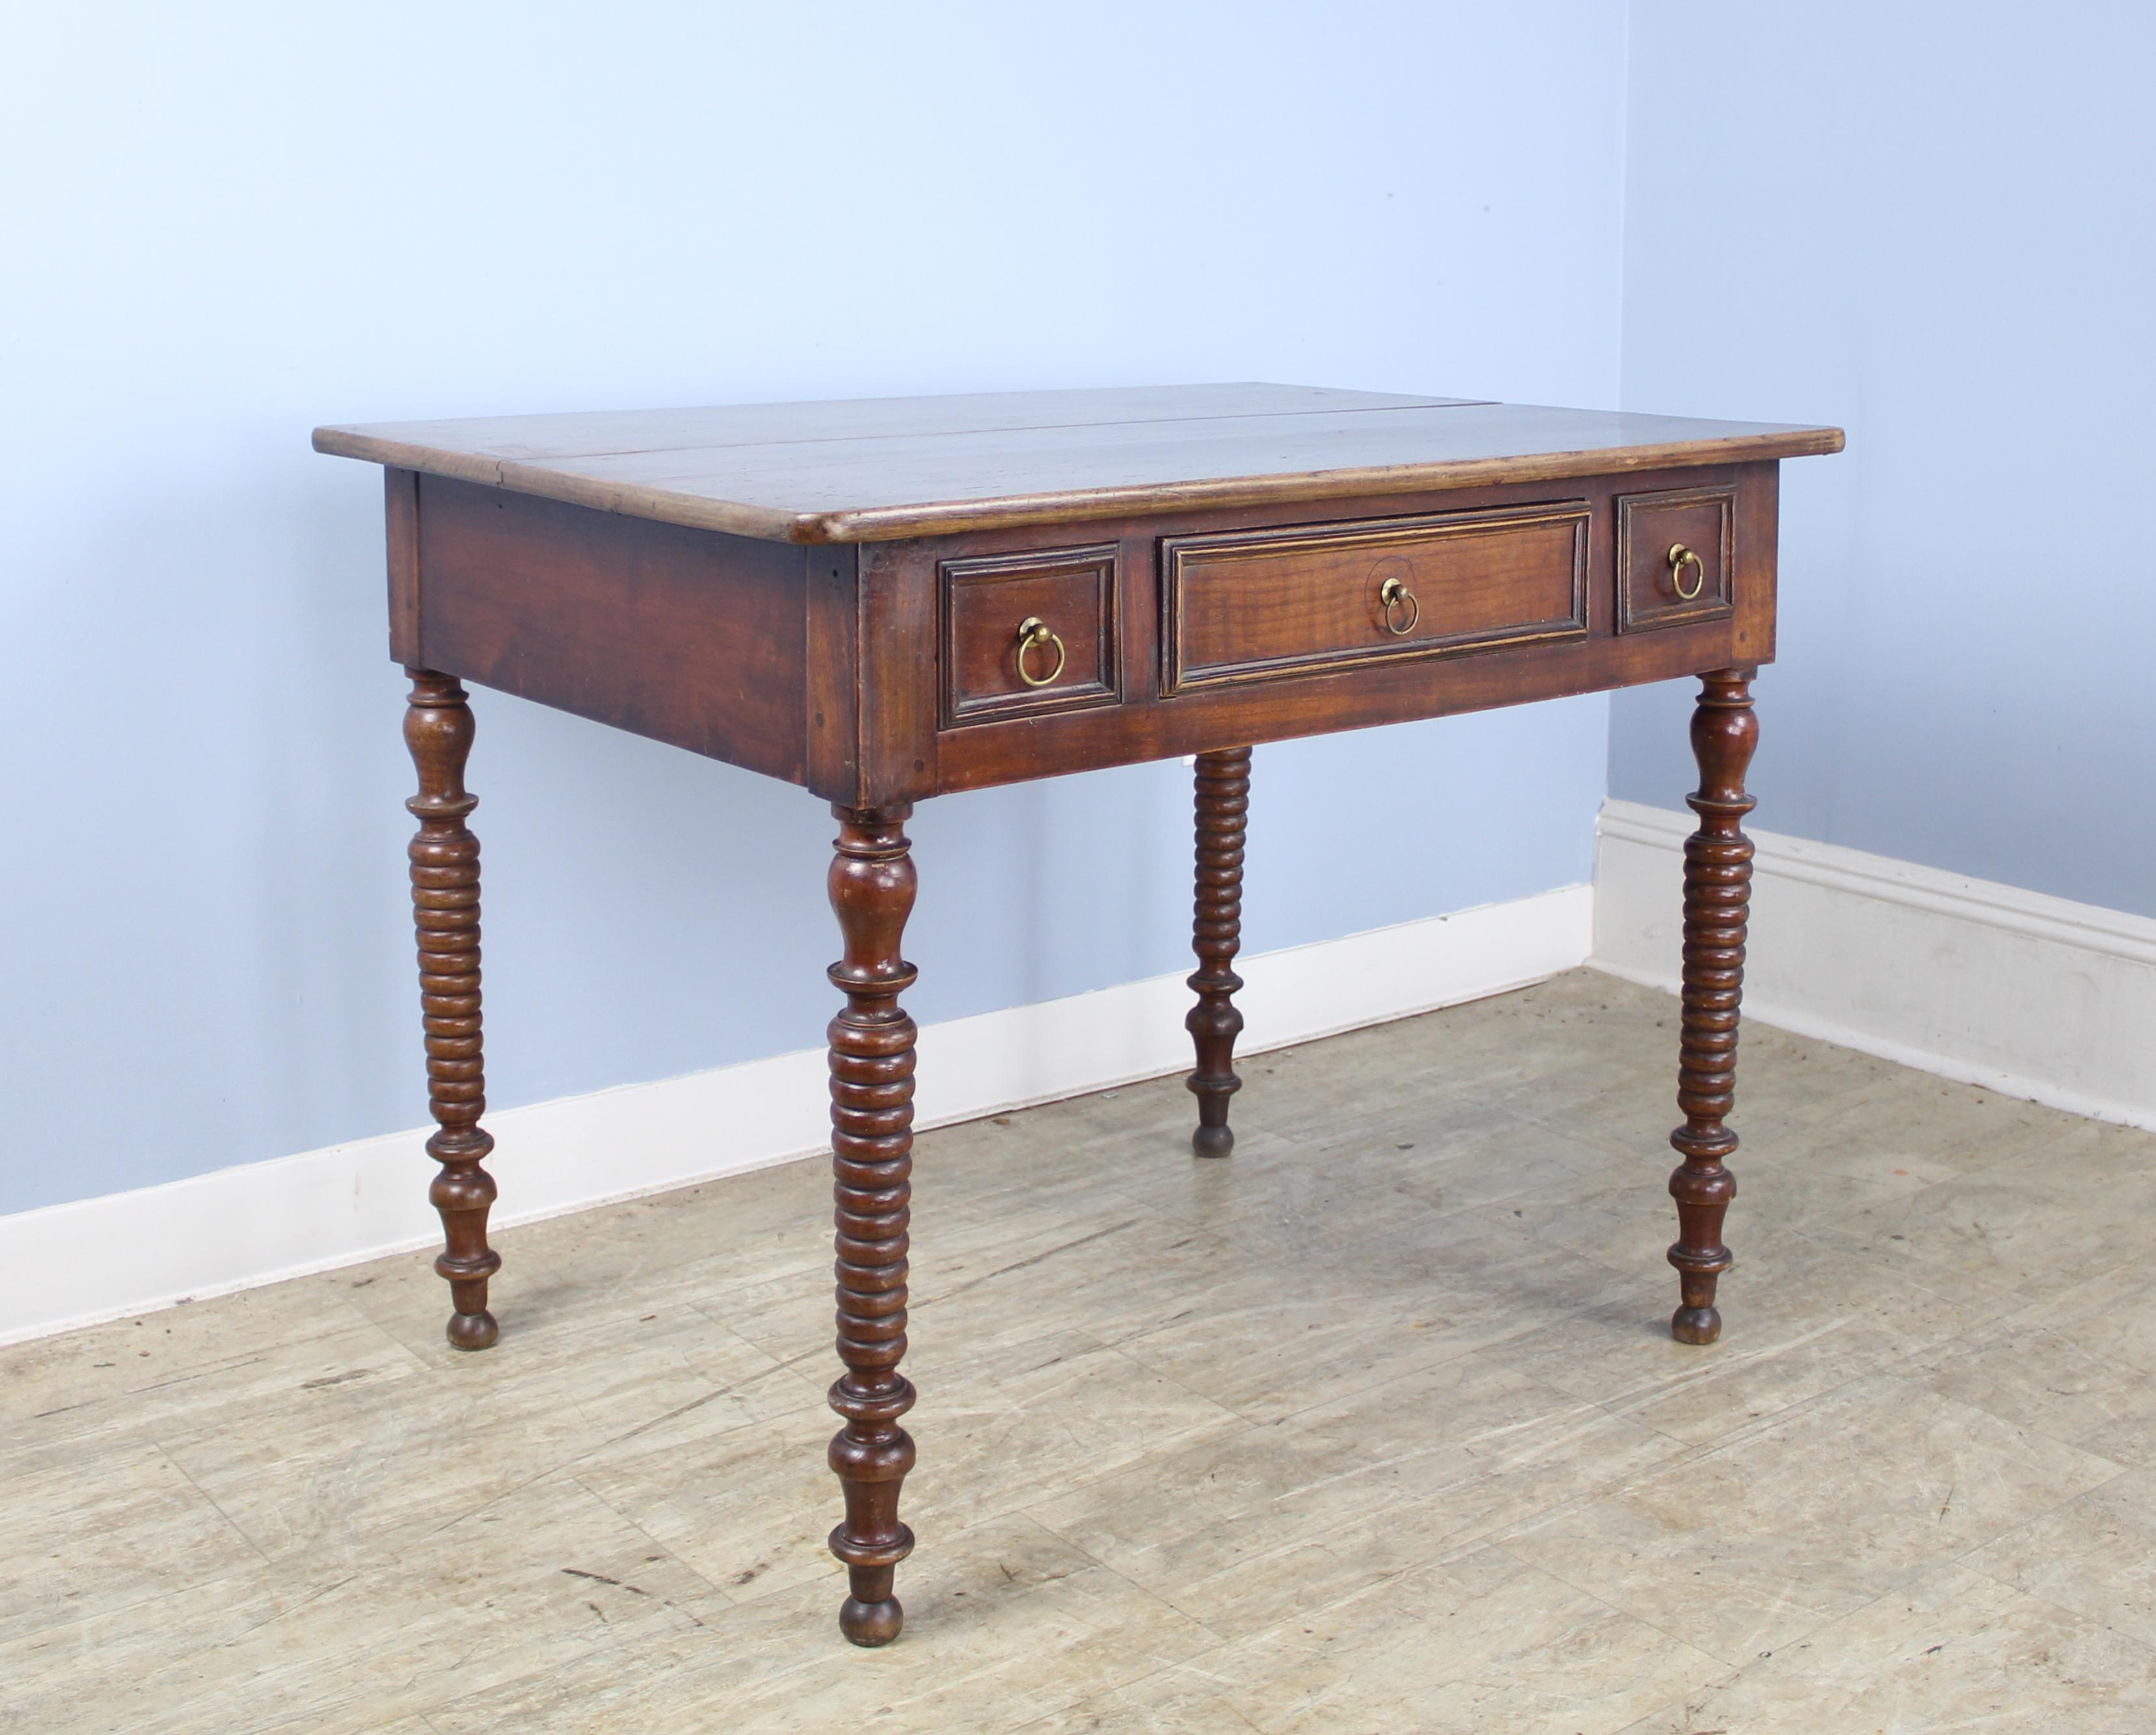 An early turned leg side table, generously proportioned with a single center drawer and two faux front drawers on either side. Very good walnut color and patina on the top. The base is most likely fruitwood. There is a separation of the planks at